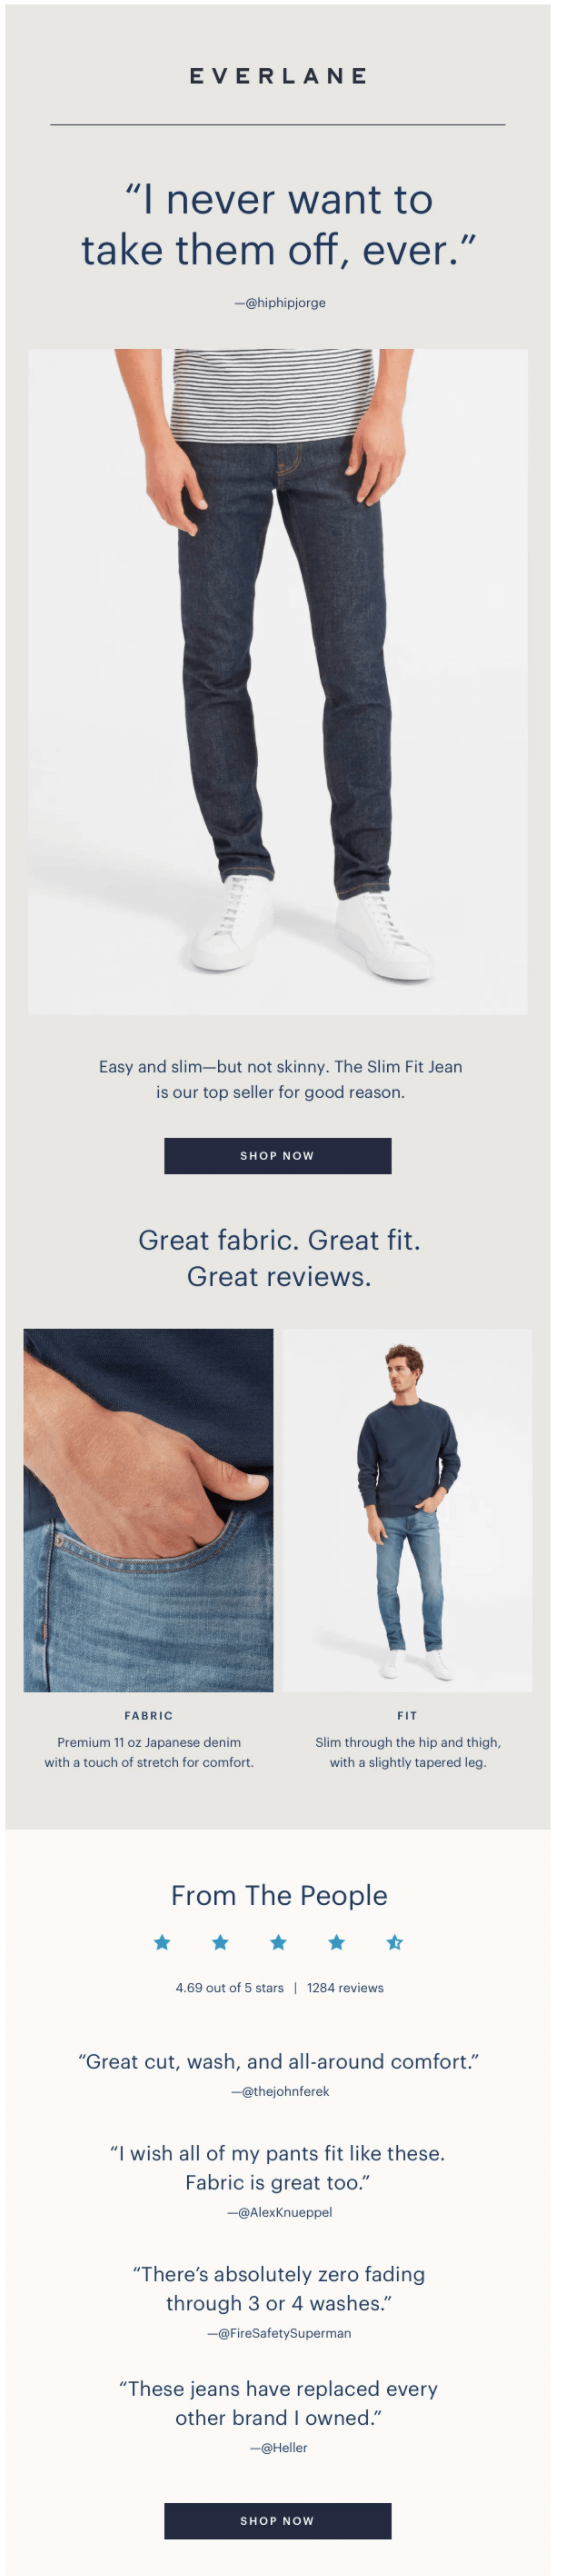 Everlane email example